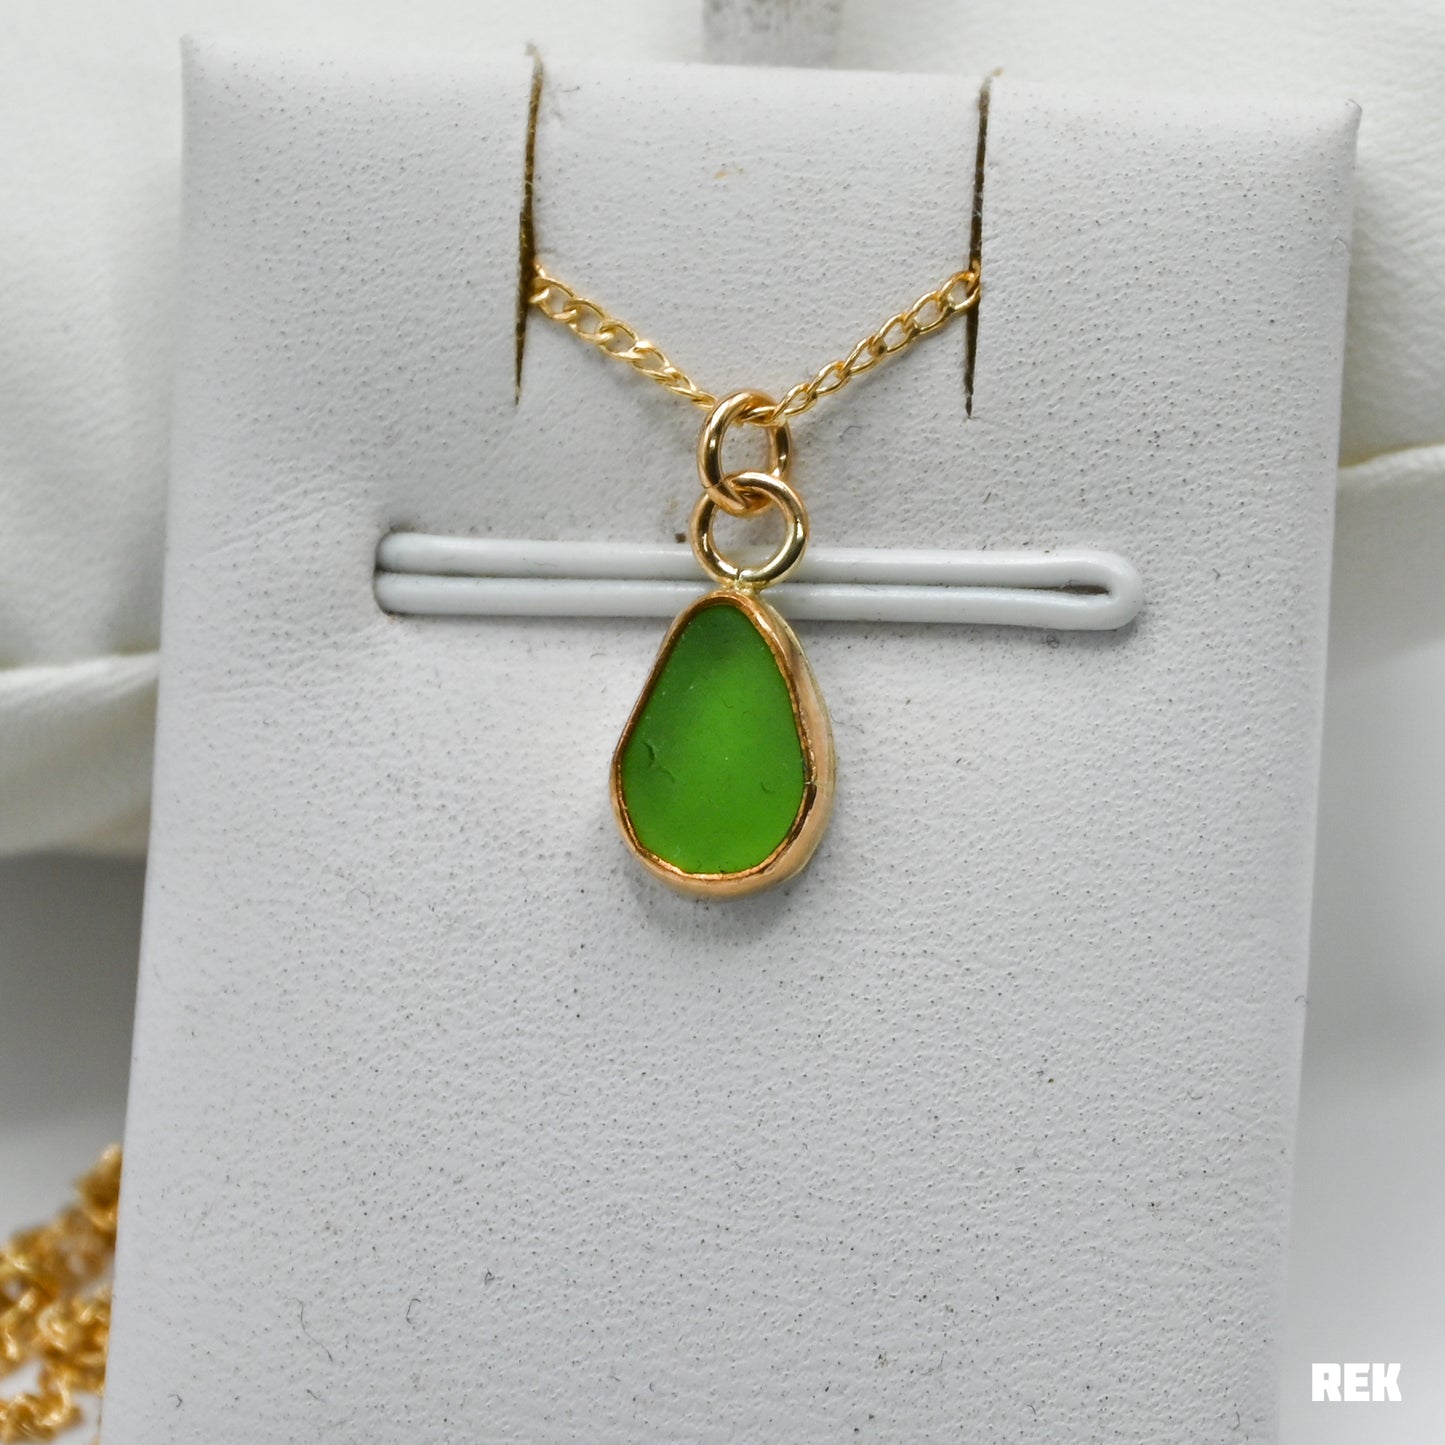 Gold fill lime green sea glass necklace